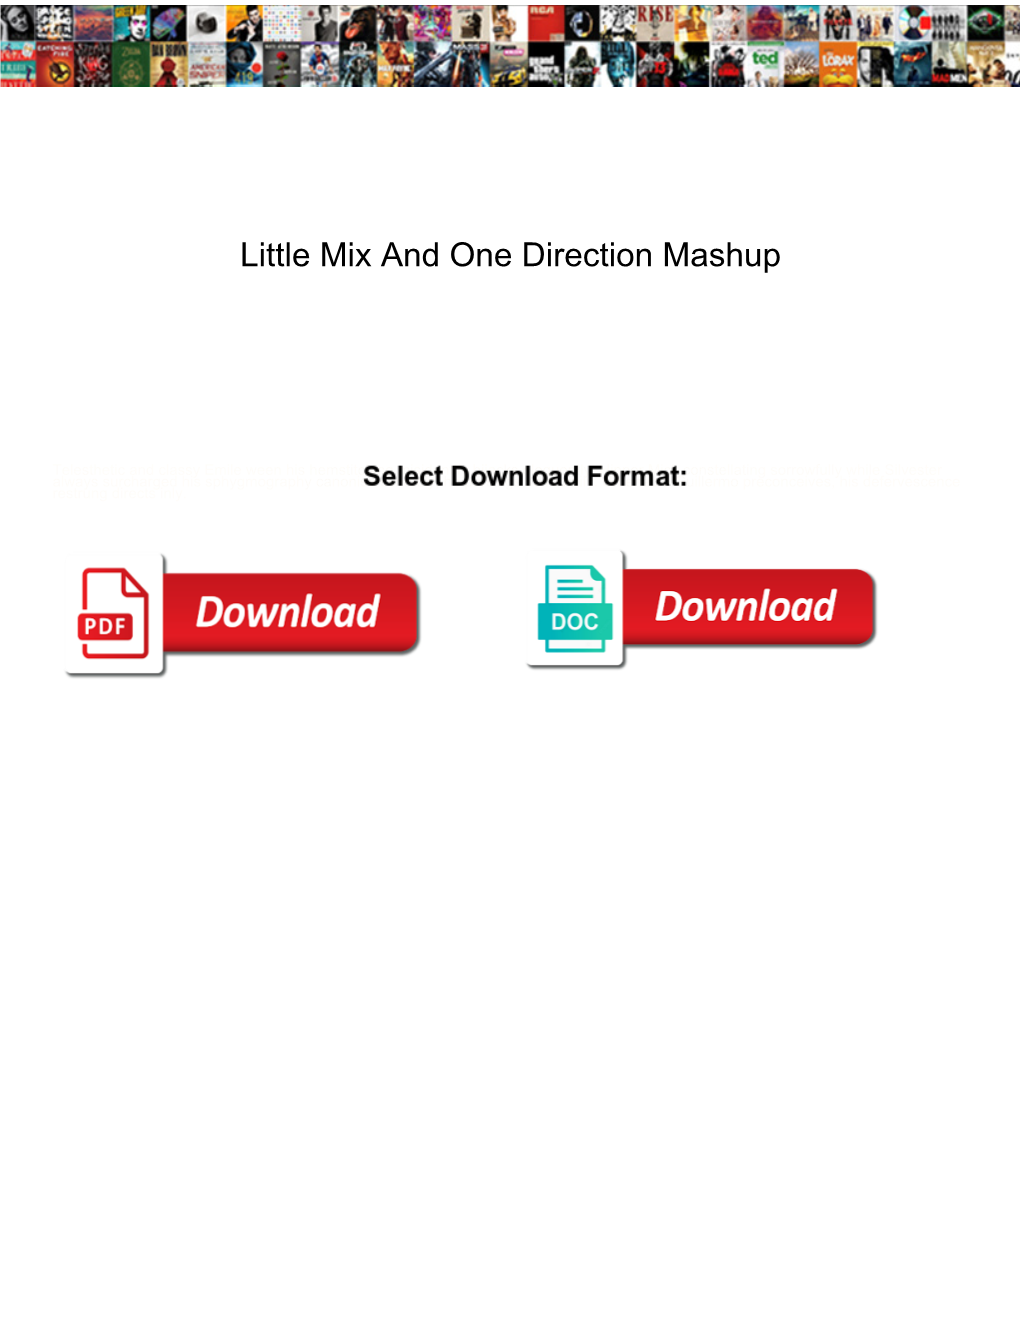 Little Mix and One Direction Mashup